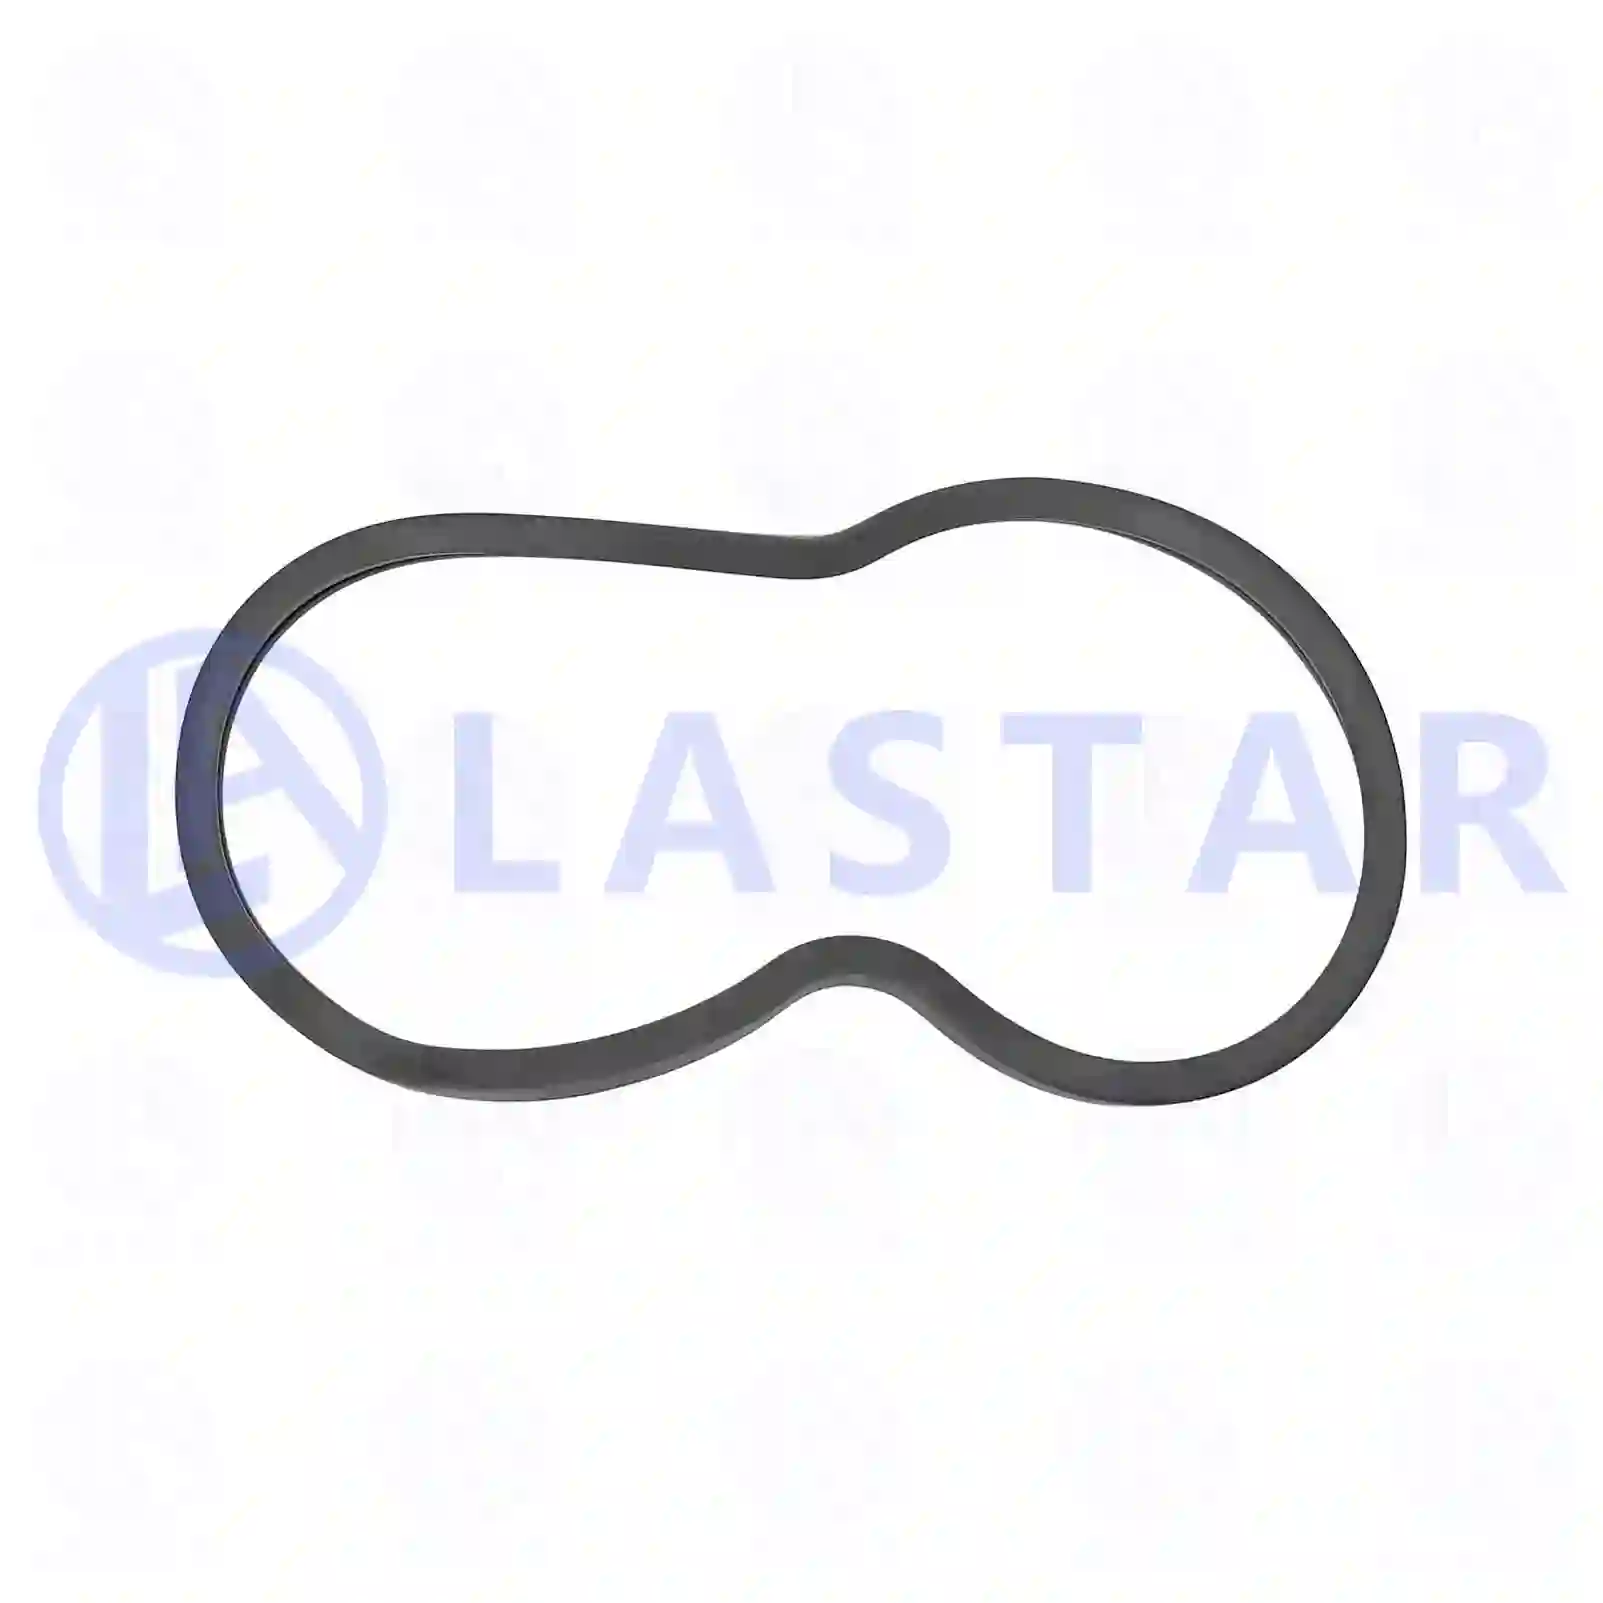 Thermostat gasket, 77709803, 1358996, 1421825, ZG02183-0008 ||  77709803 Lastar Spare Part | Truck Spare Parts, Auotomotive Spare Parts Thermostat gasket, 77709803, 1358996, 1421825, ZG02183-0008 ||  77709803 Lastar Spare Part | Truck Spare Parts, Auotomotive Spare Parts